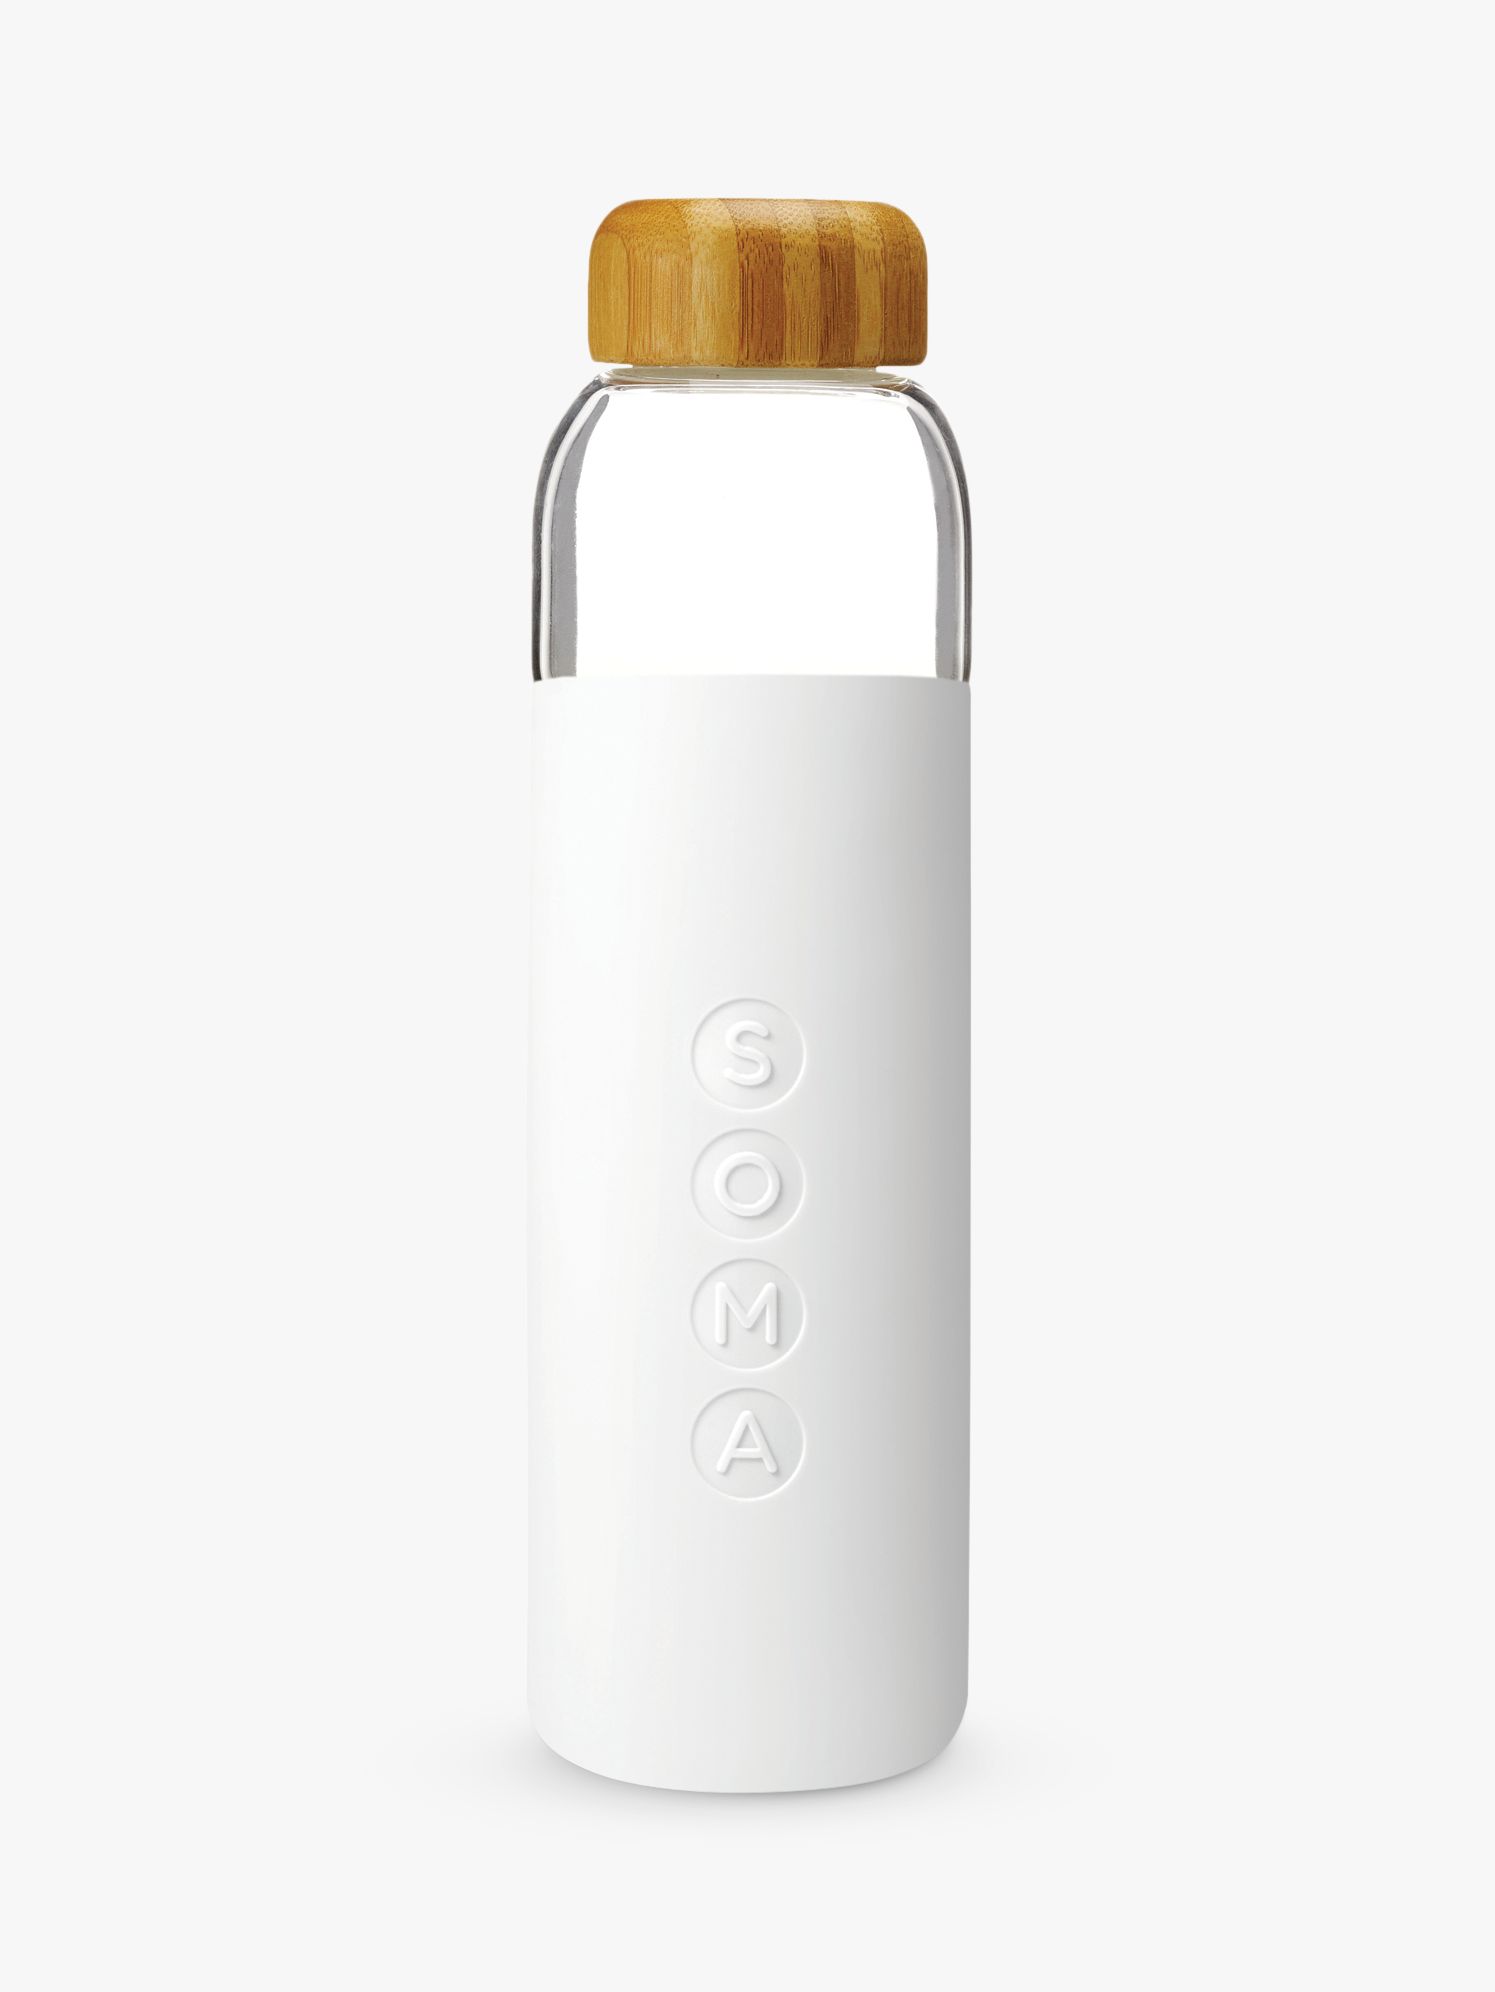 Soma Glass Drinks Bottle with Bamboo Lid, 480ml